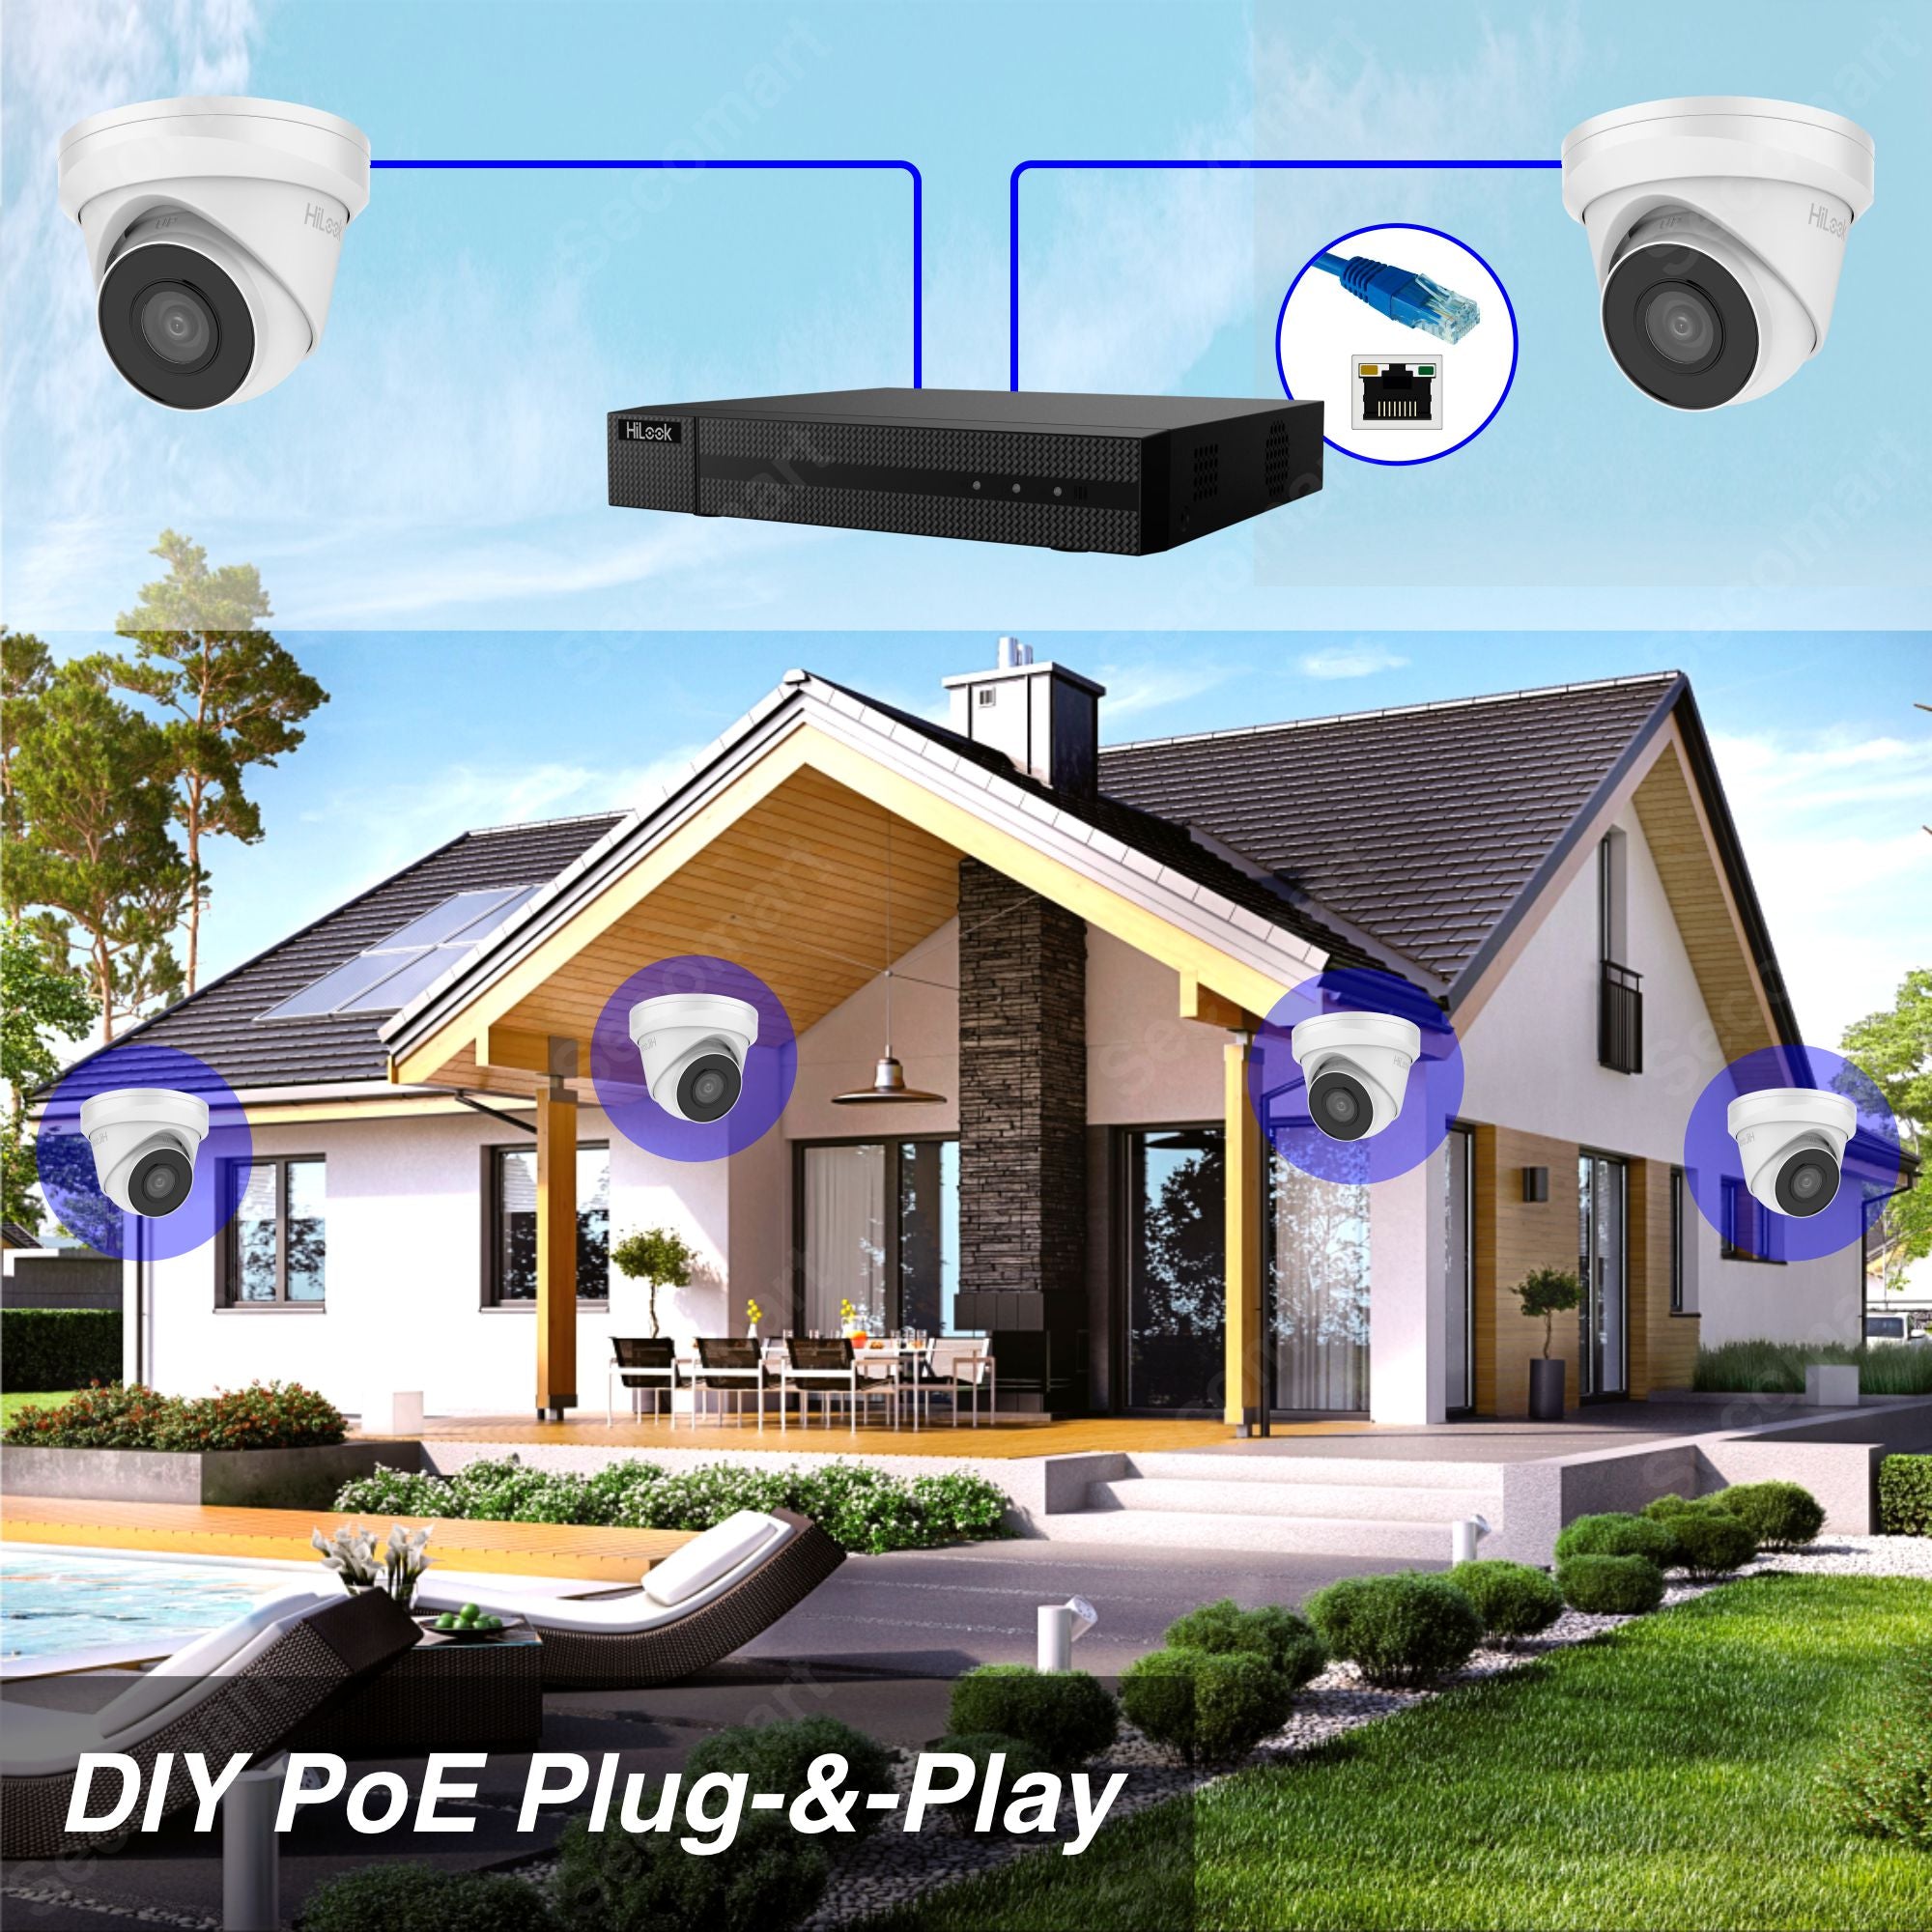 Hilook 4K Security Camera System, 8-Camera PoE NVR Surveillance Kit Outdoor 3TB DIY Wired Turret, Hilook by Hikvision